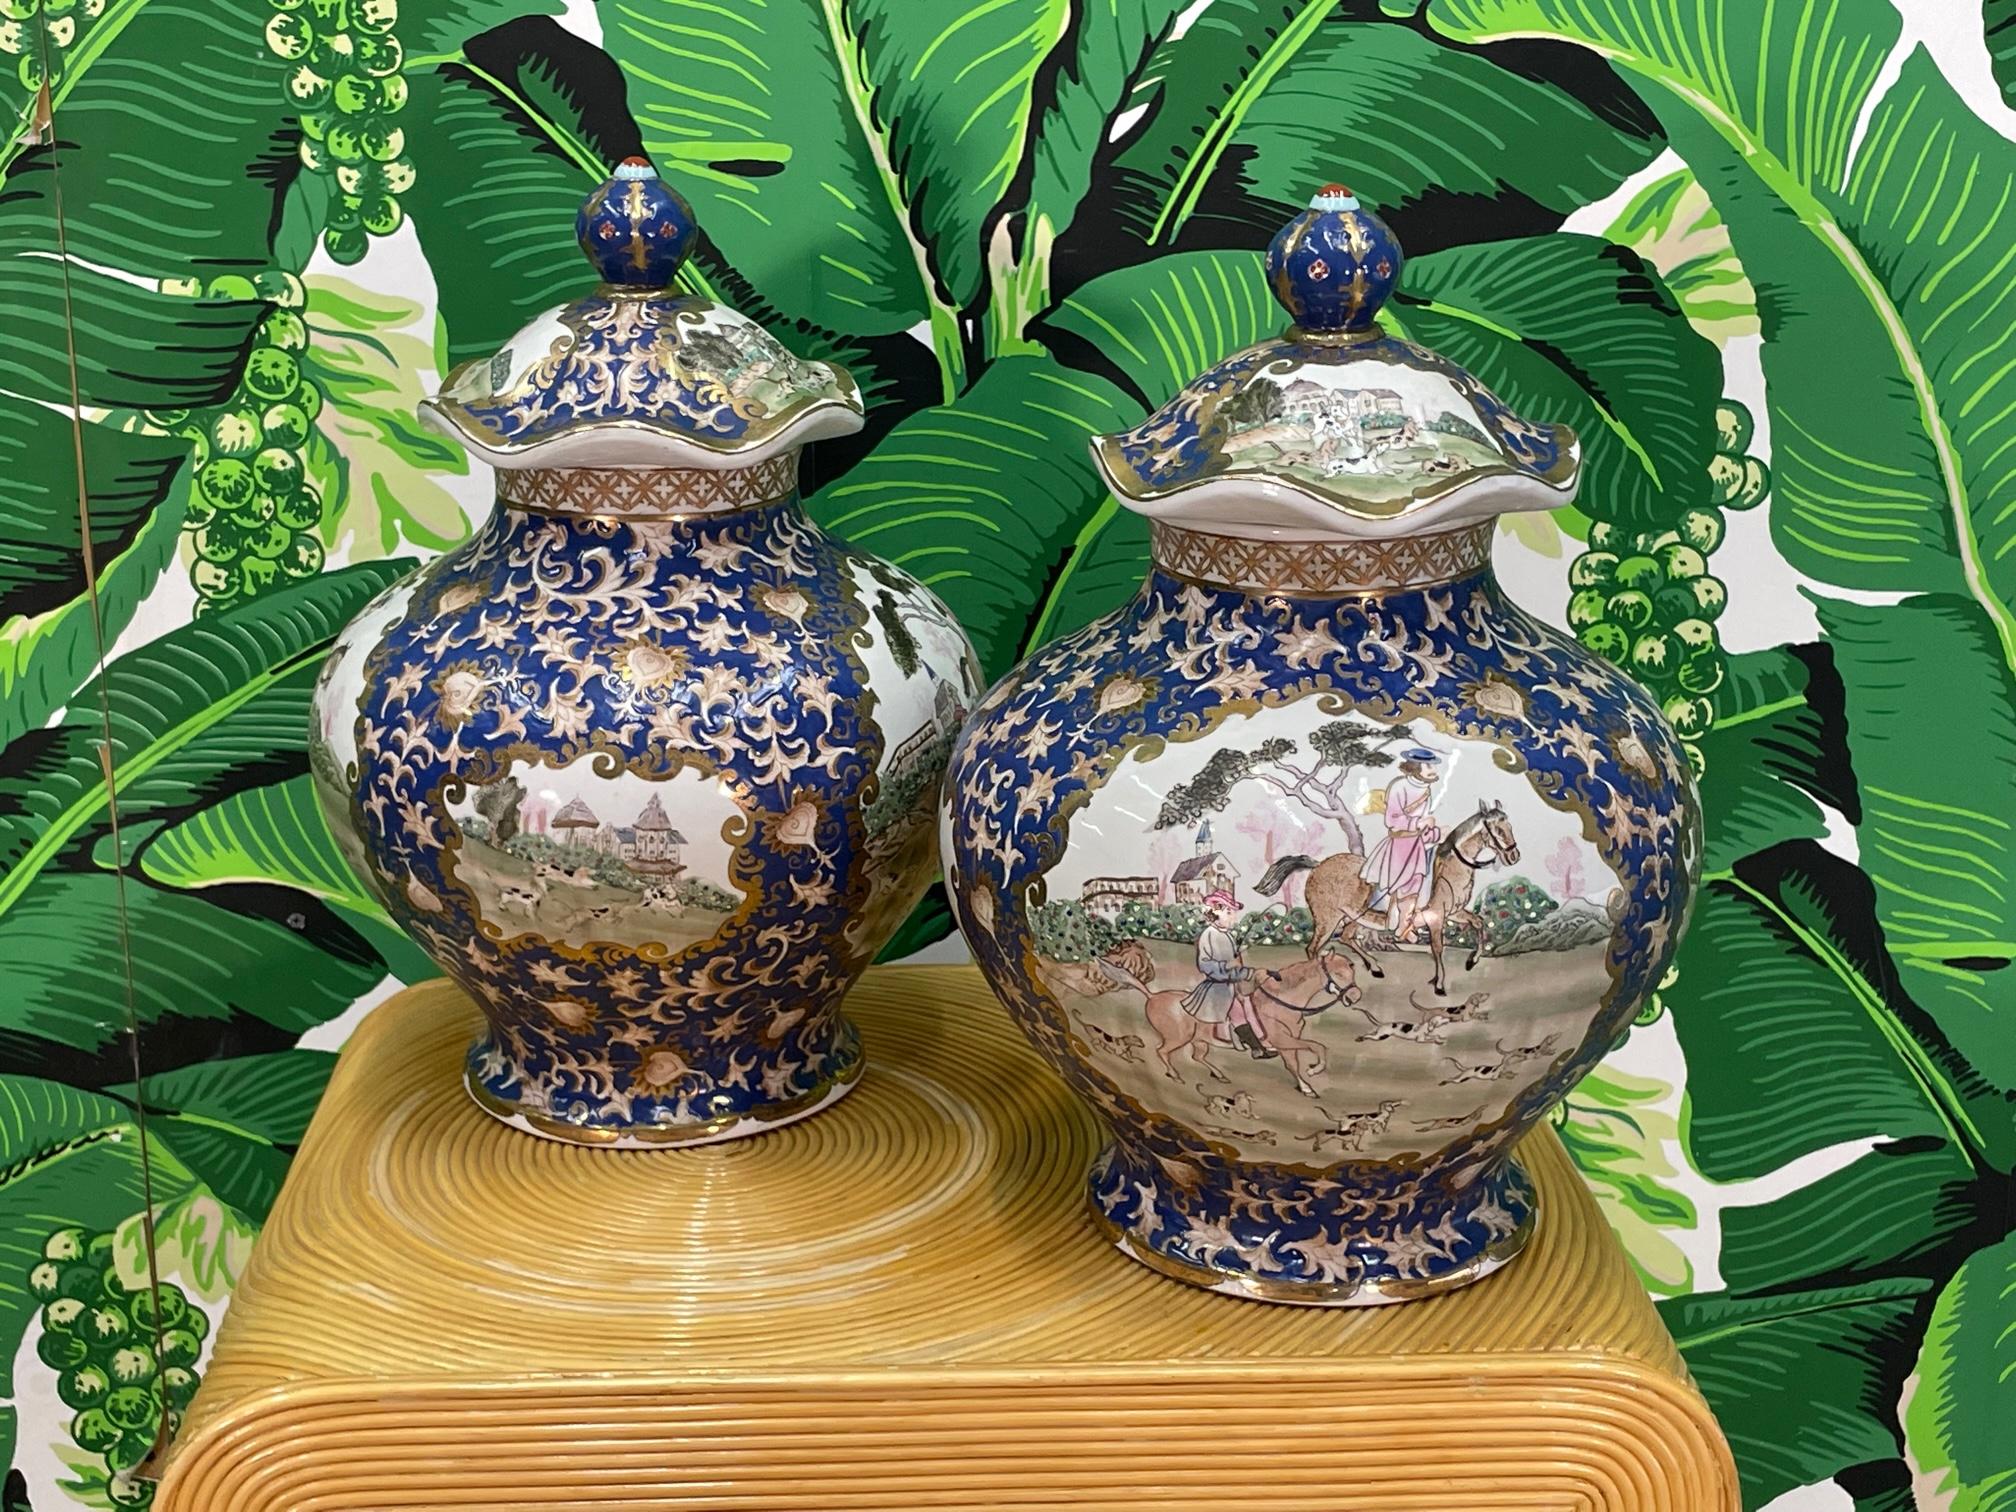 Pair of Asian baluster jars with lids feature bold, colorful hand painted artwork with a glossy glazed finish. Maker's mark present on bottom. Good condition with no chips or cracks. 
For a shipping quote to your exact zip code, please message us.
